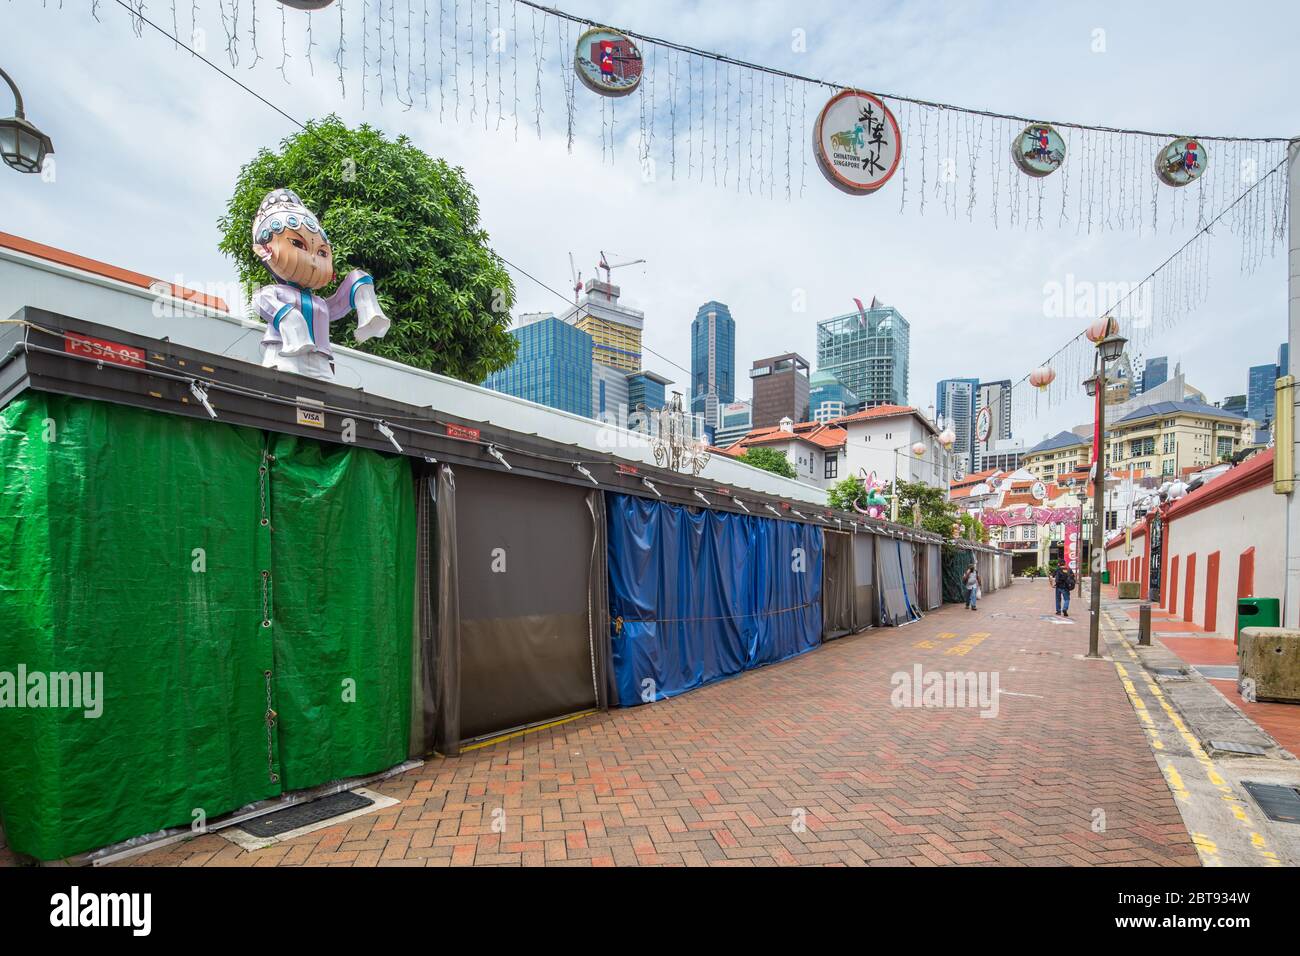 May 2020. Negative scene of shut down business at the empty streets of Chinatown. Singapore. Stock Photo